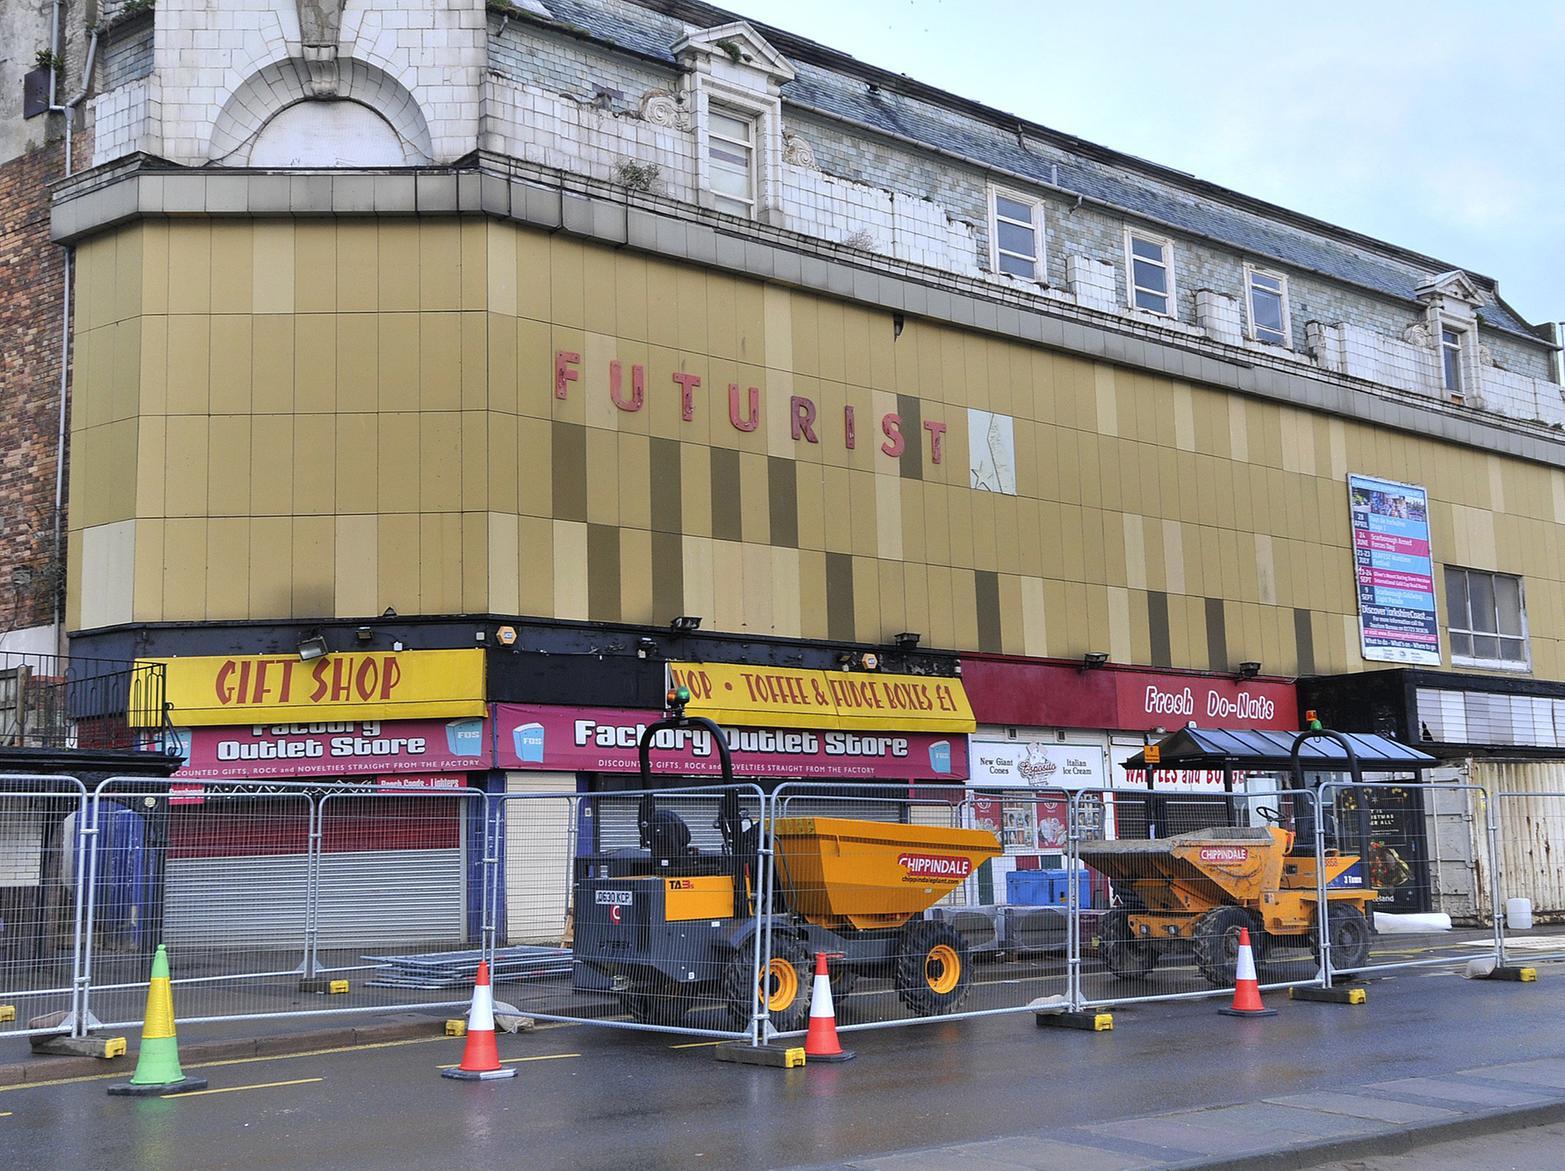 Despite a long fight from protesters, the Futurist Theatre was demolished in 2018 after closing in 2014. The future of the site is not yet known, but Flamingo Land are the preferred developer.